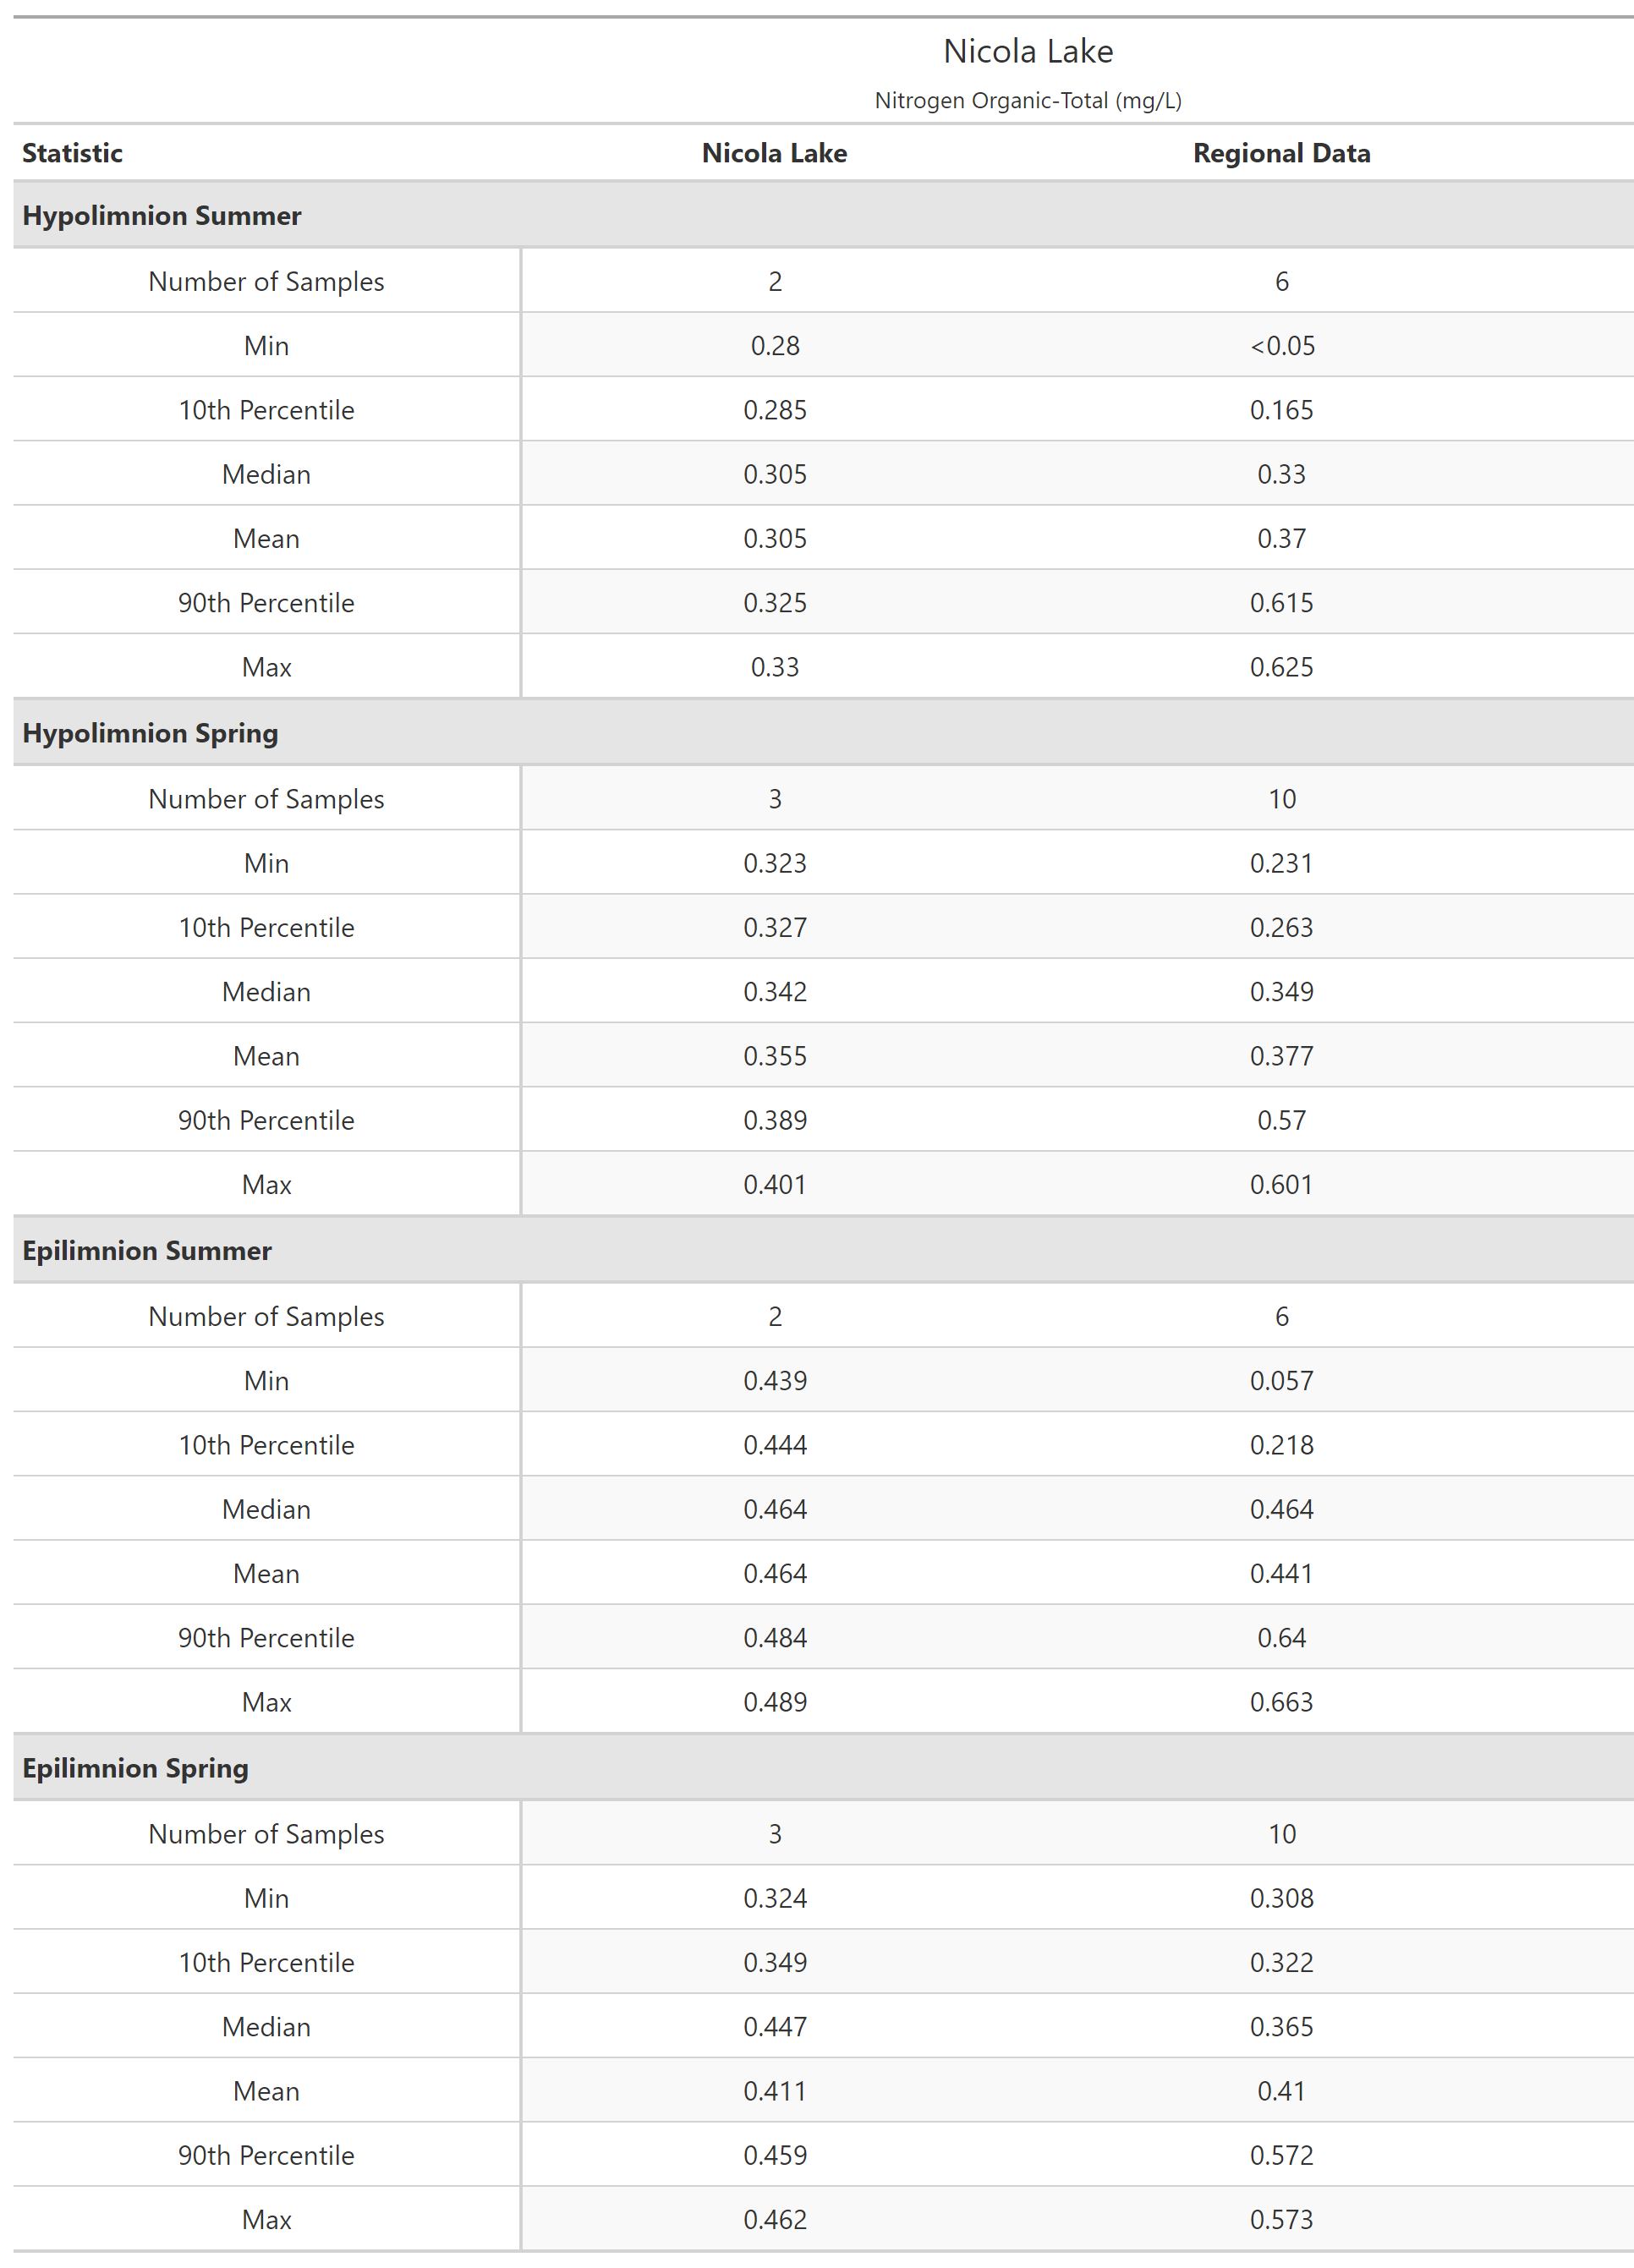 A table of summary statistics for Nitrogen Organic-Total with comparison to regional data